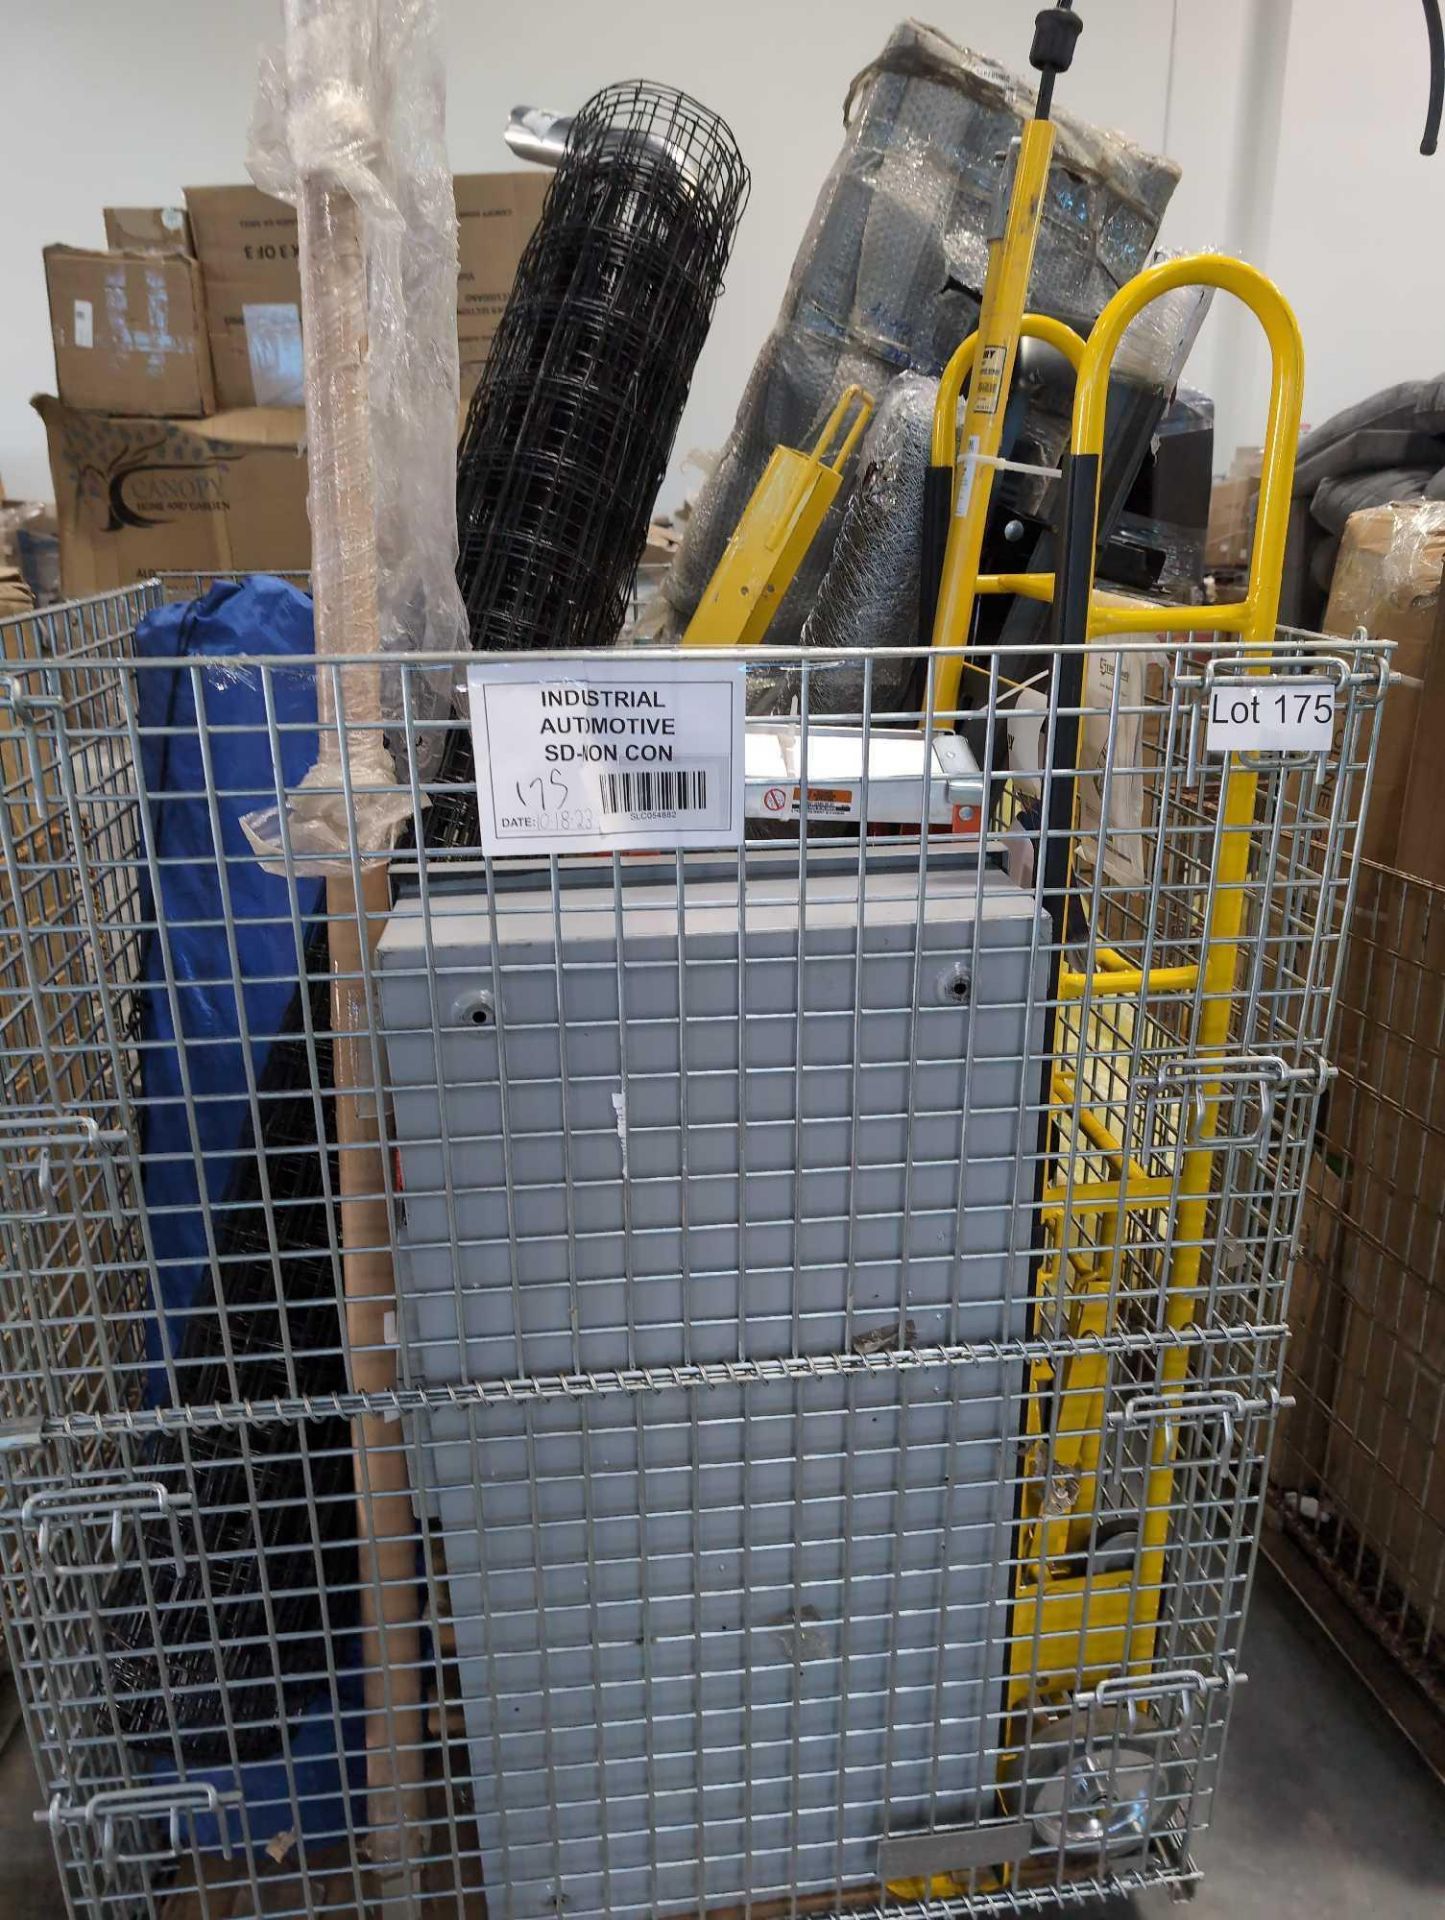 strongway still appliance hand truck, step ladders, fencing and other items